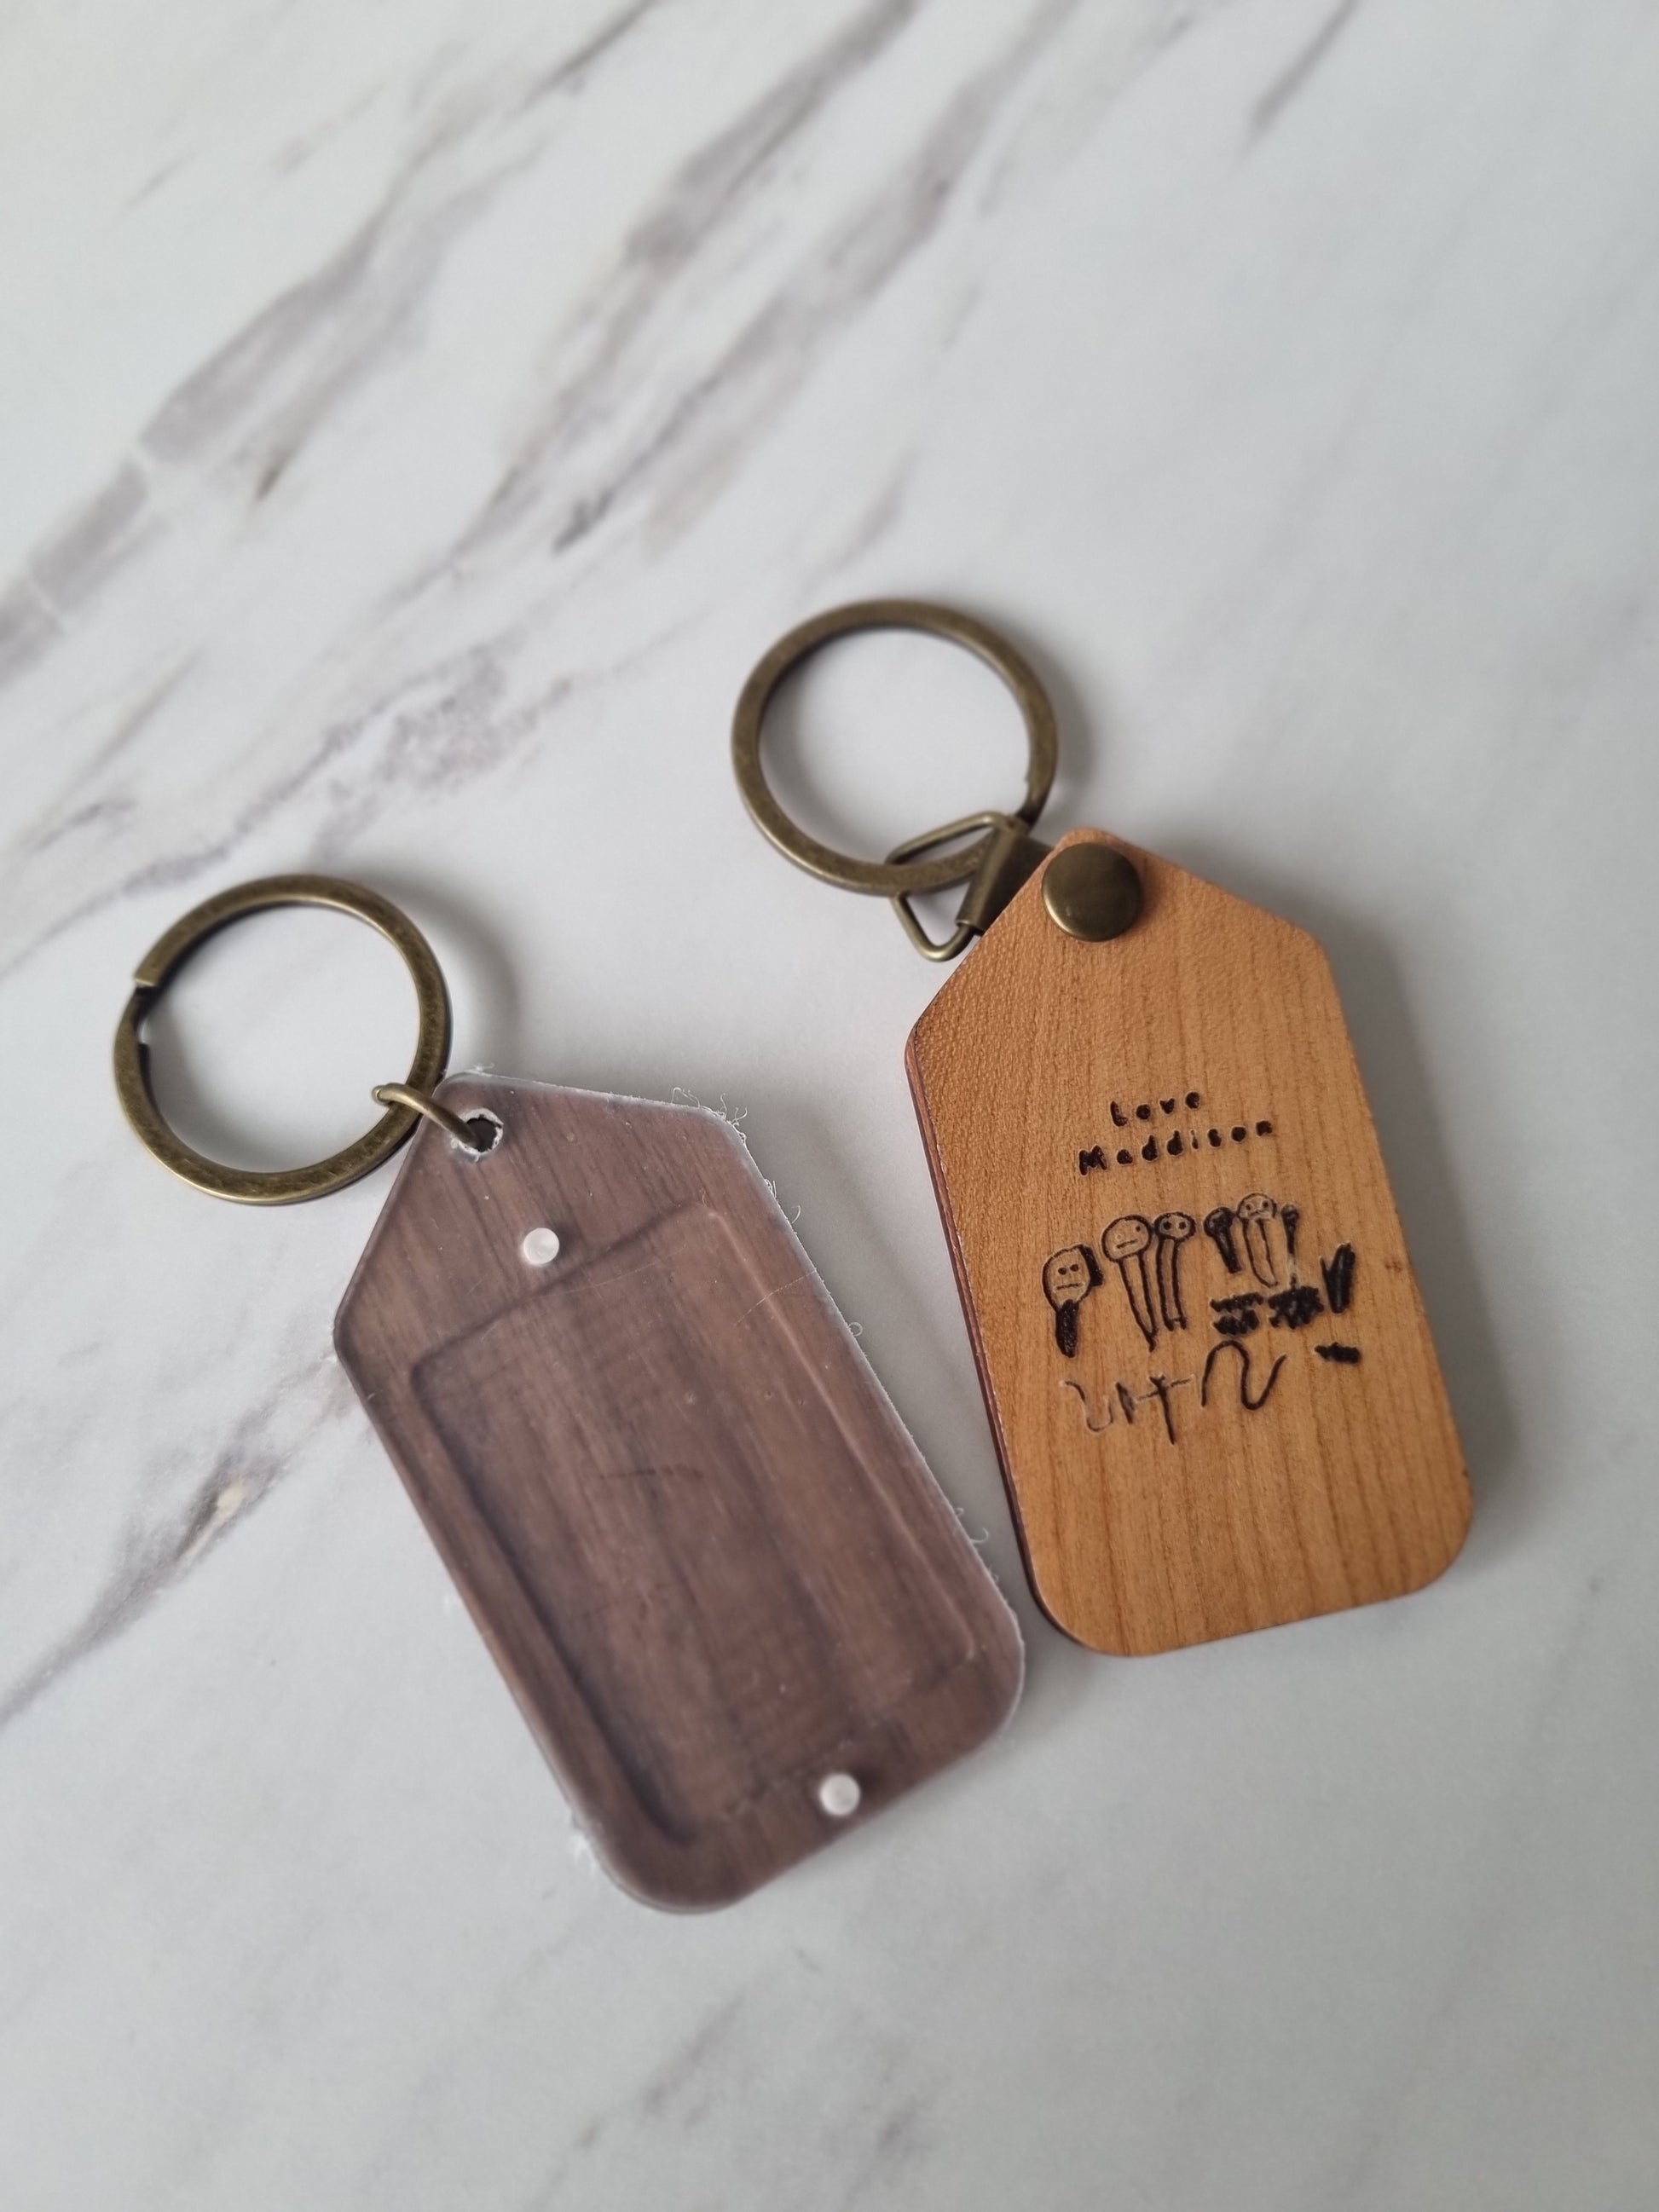 The Memory Spinner Key Chain - Personalized Wooden Jewelry Online